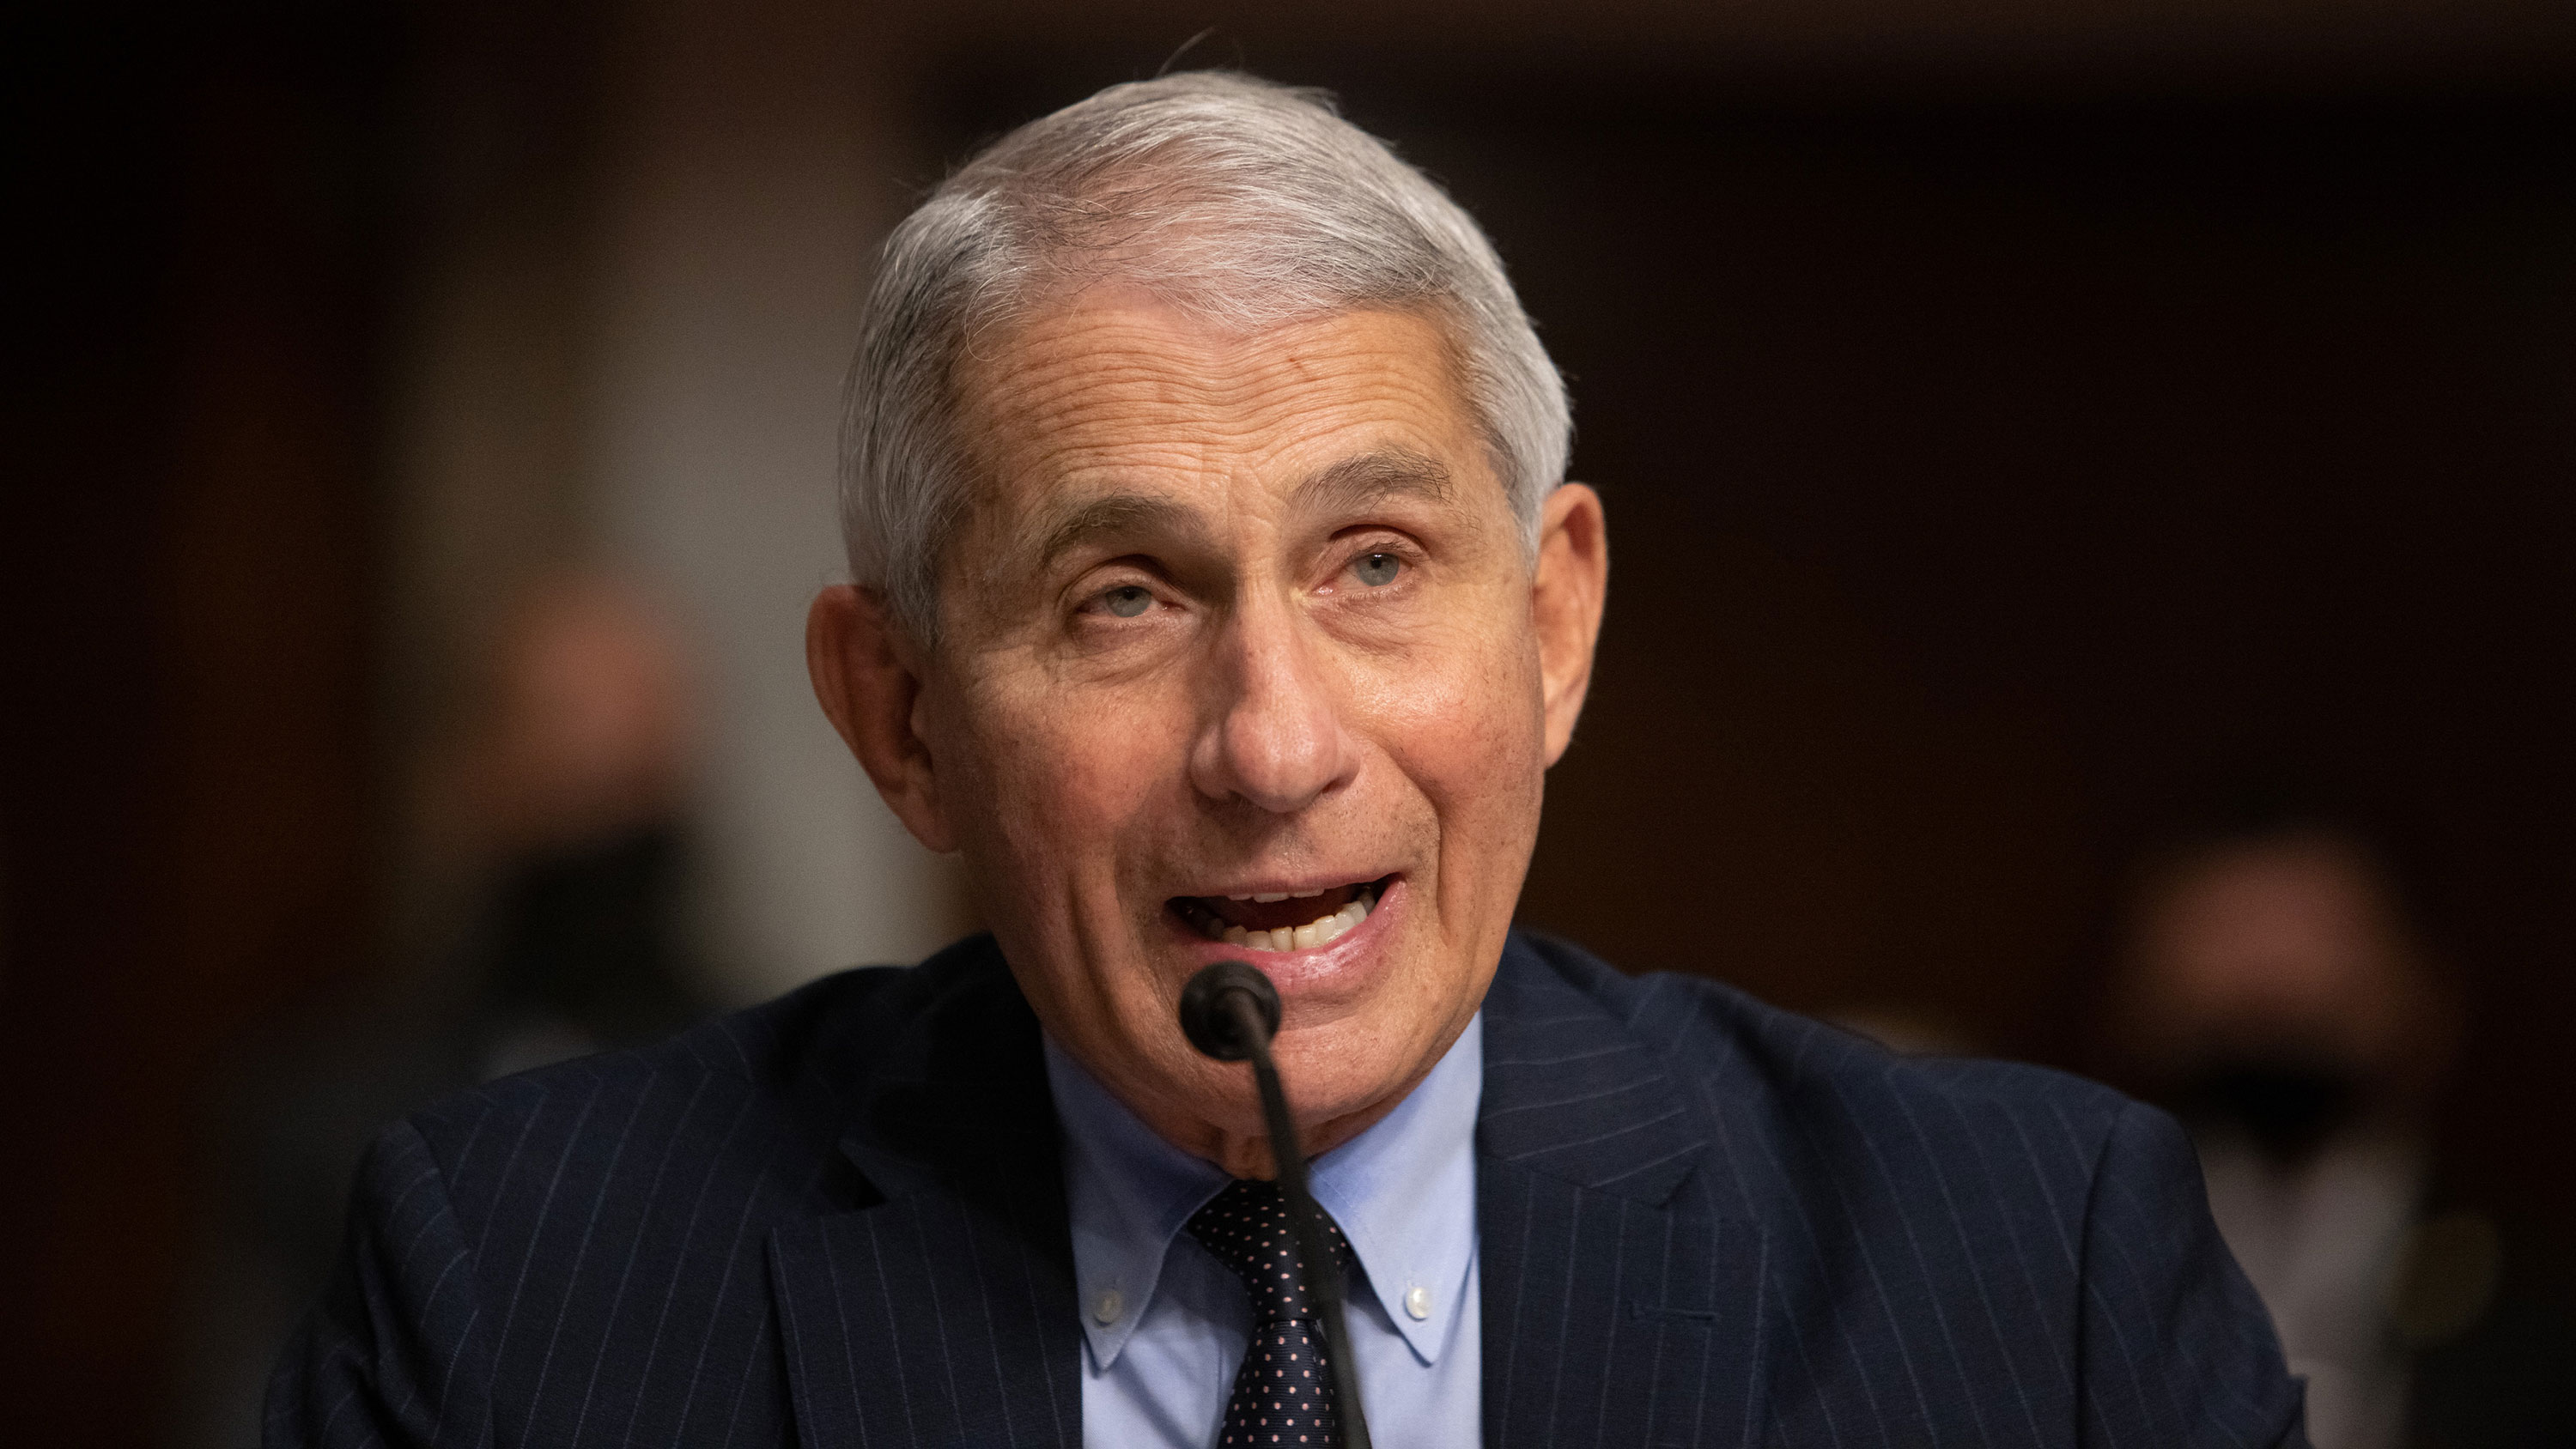 Dr. Anthony Fauci testifies during a US Senate Health, Education, Labor, and Pensions Committee hearing in Washington, DC, on September 23.